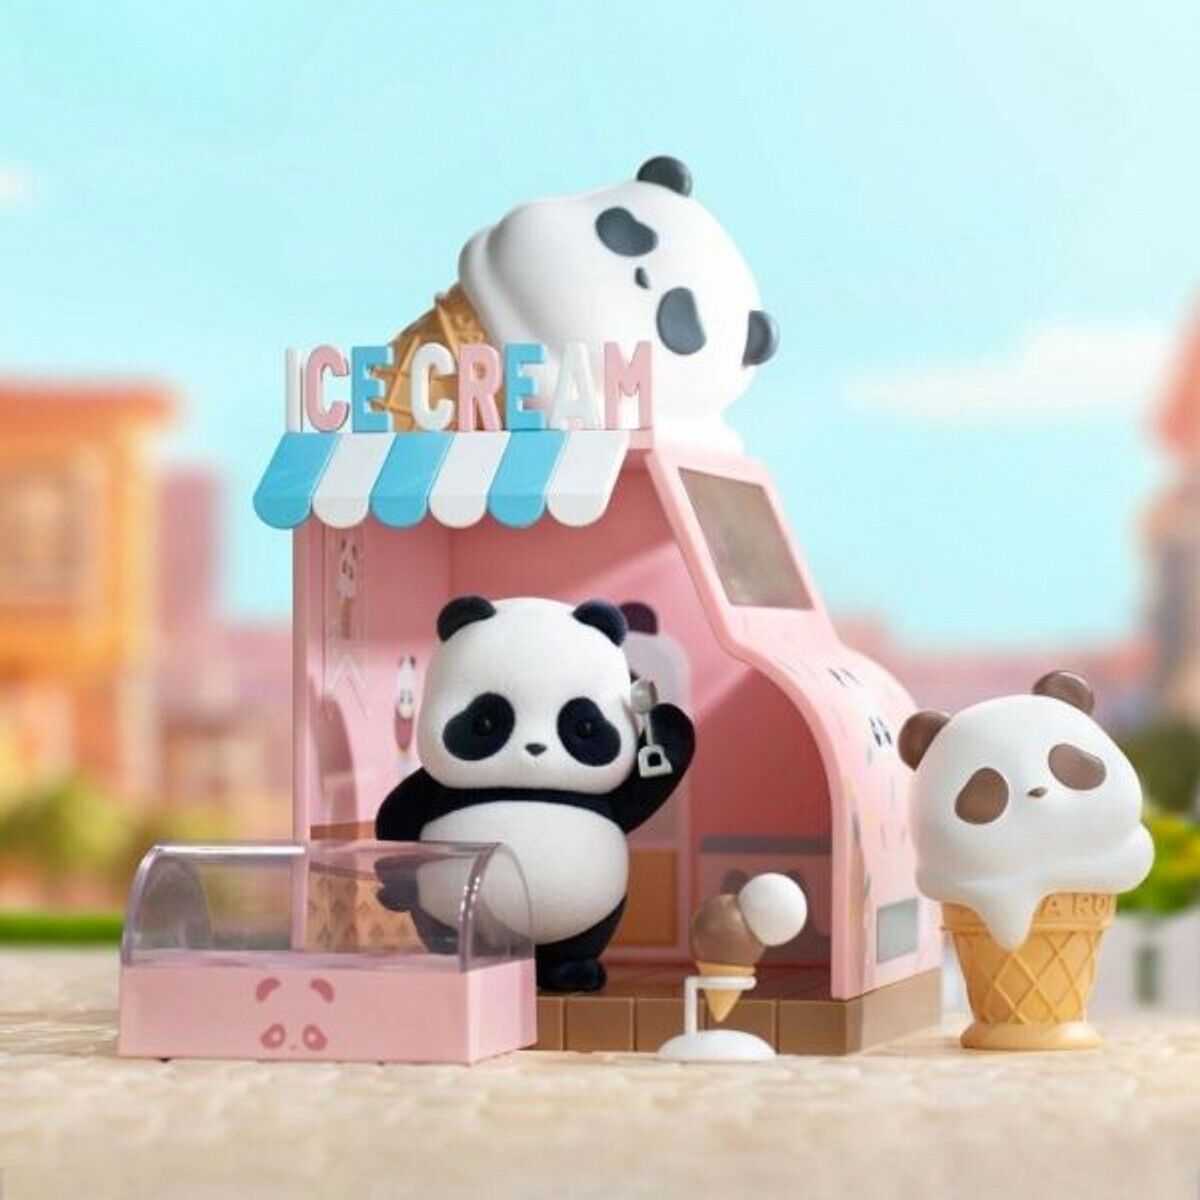 Panda Roll Shopping Street Blind Box by 52 Toys Confirmed - Ice Cream